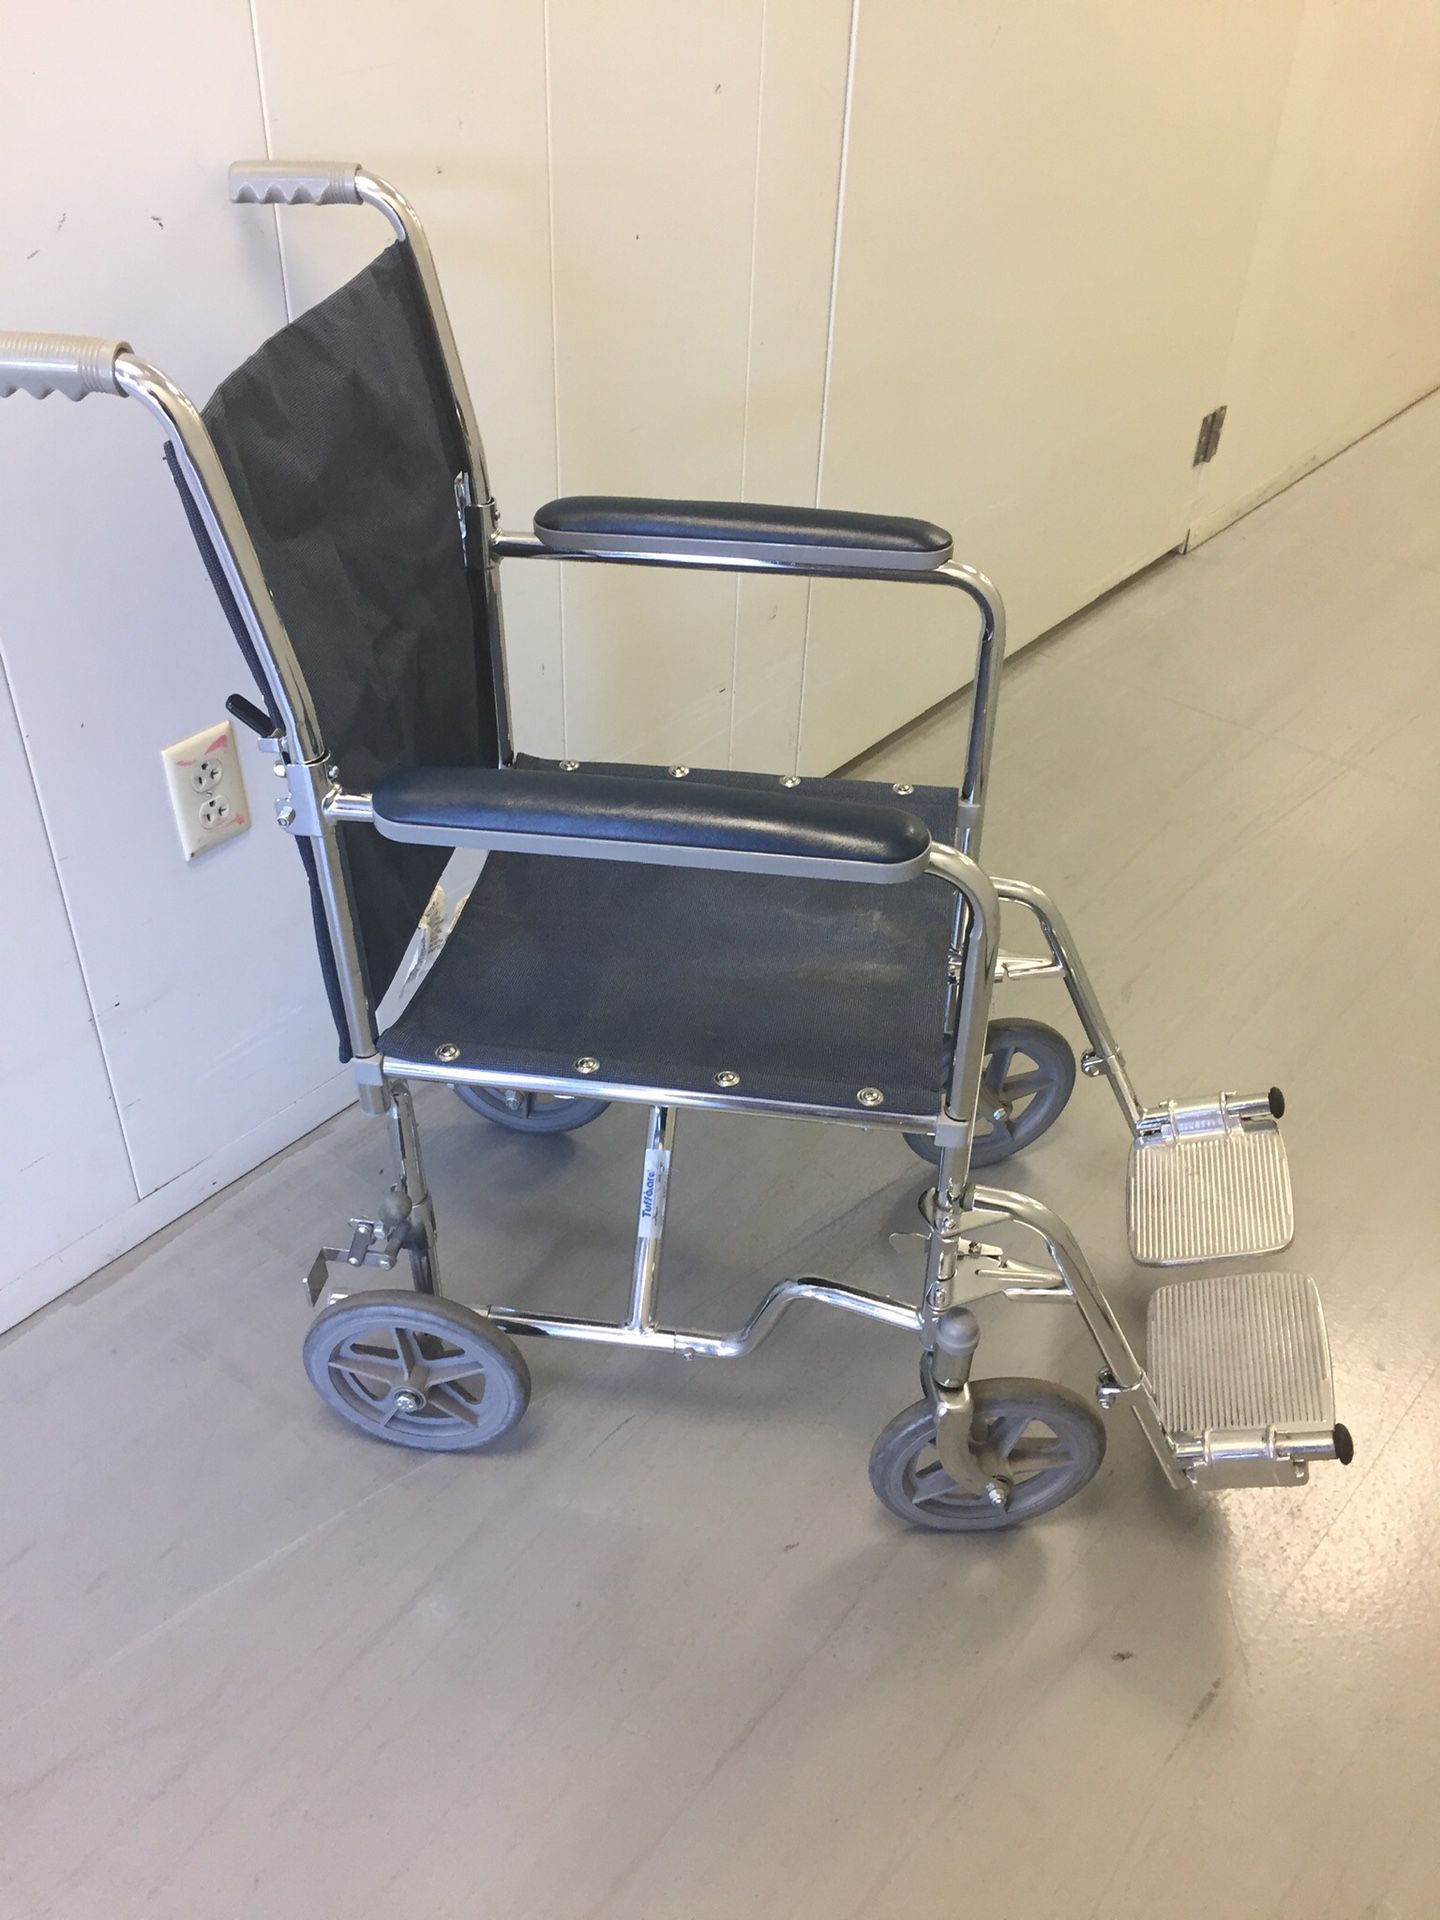 Sunday October 25th Only Affordable Compact Folding Wheelchair